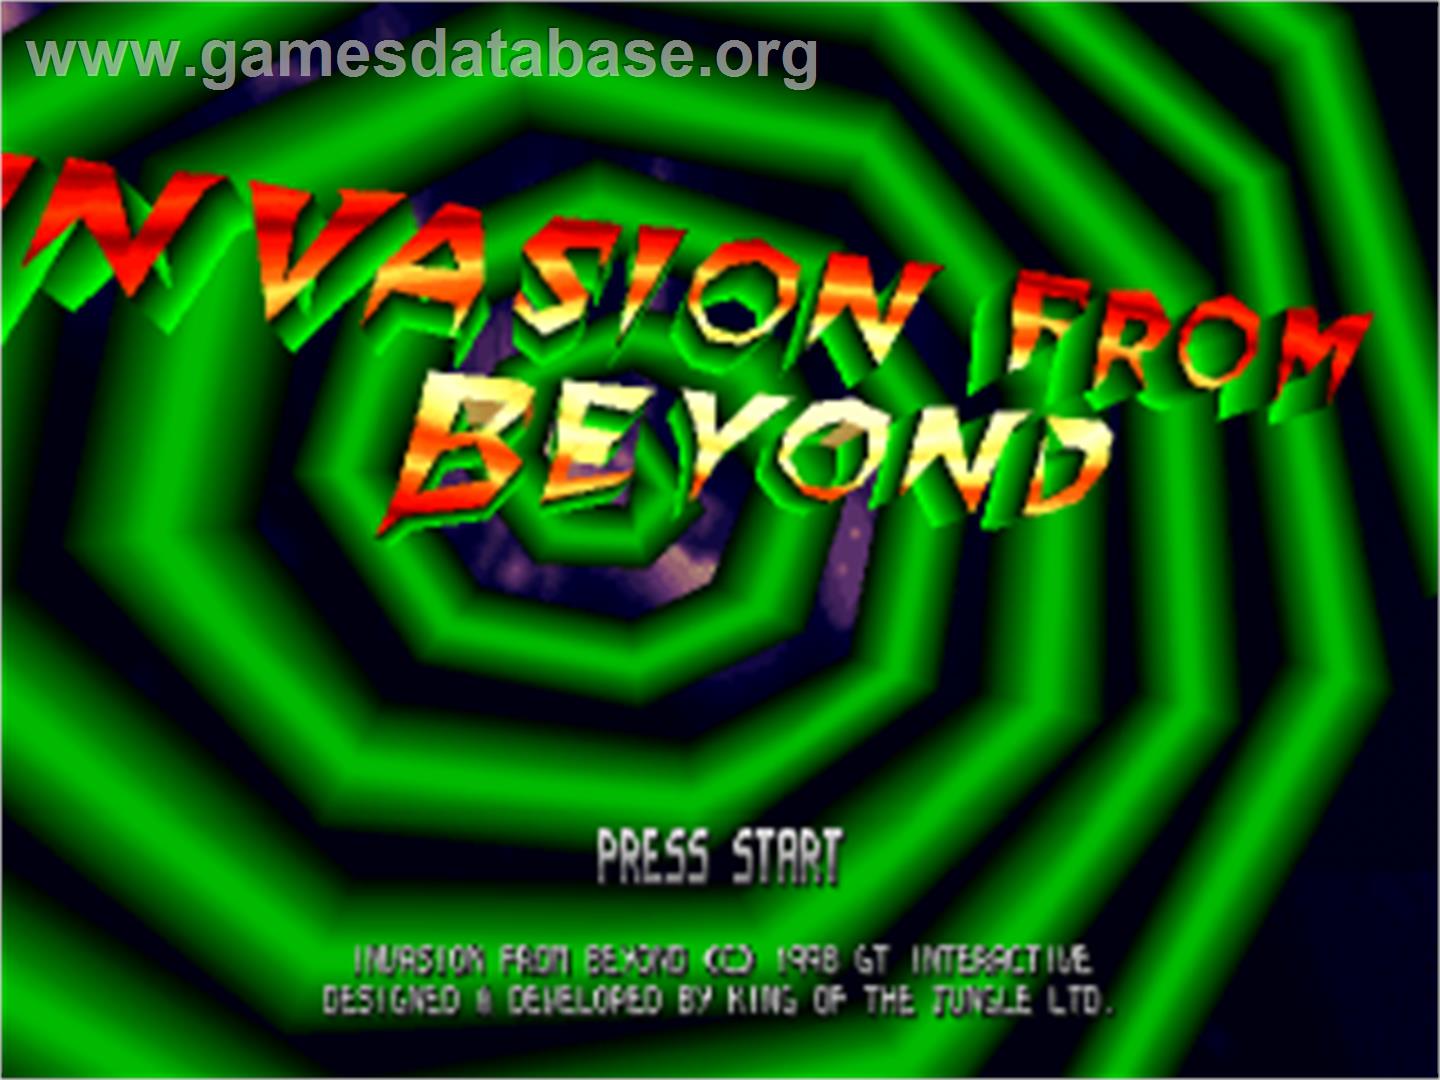 Invasion From Beyond - Sony Playstation - Artwork - Title Screen